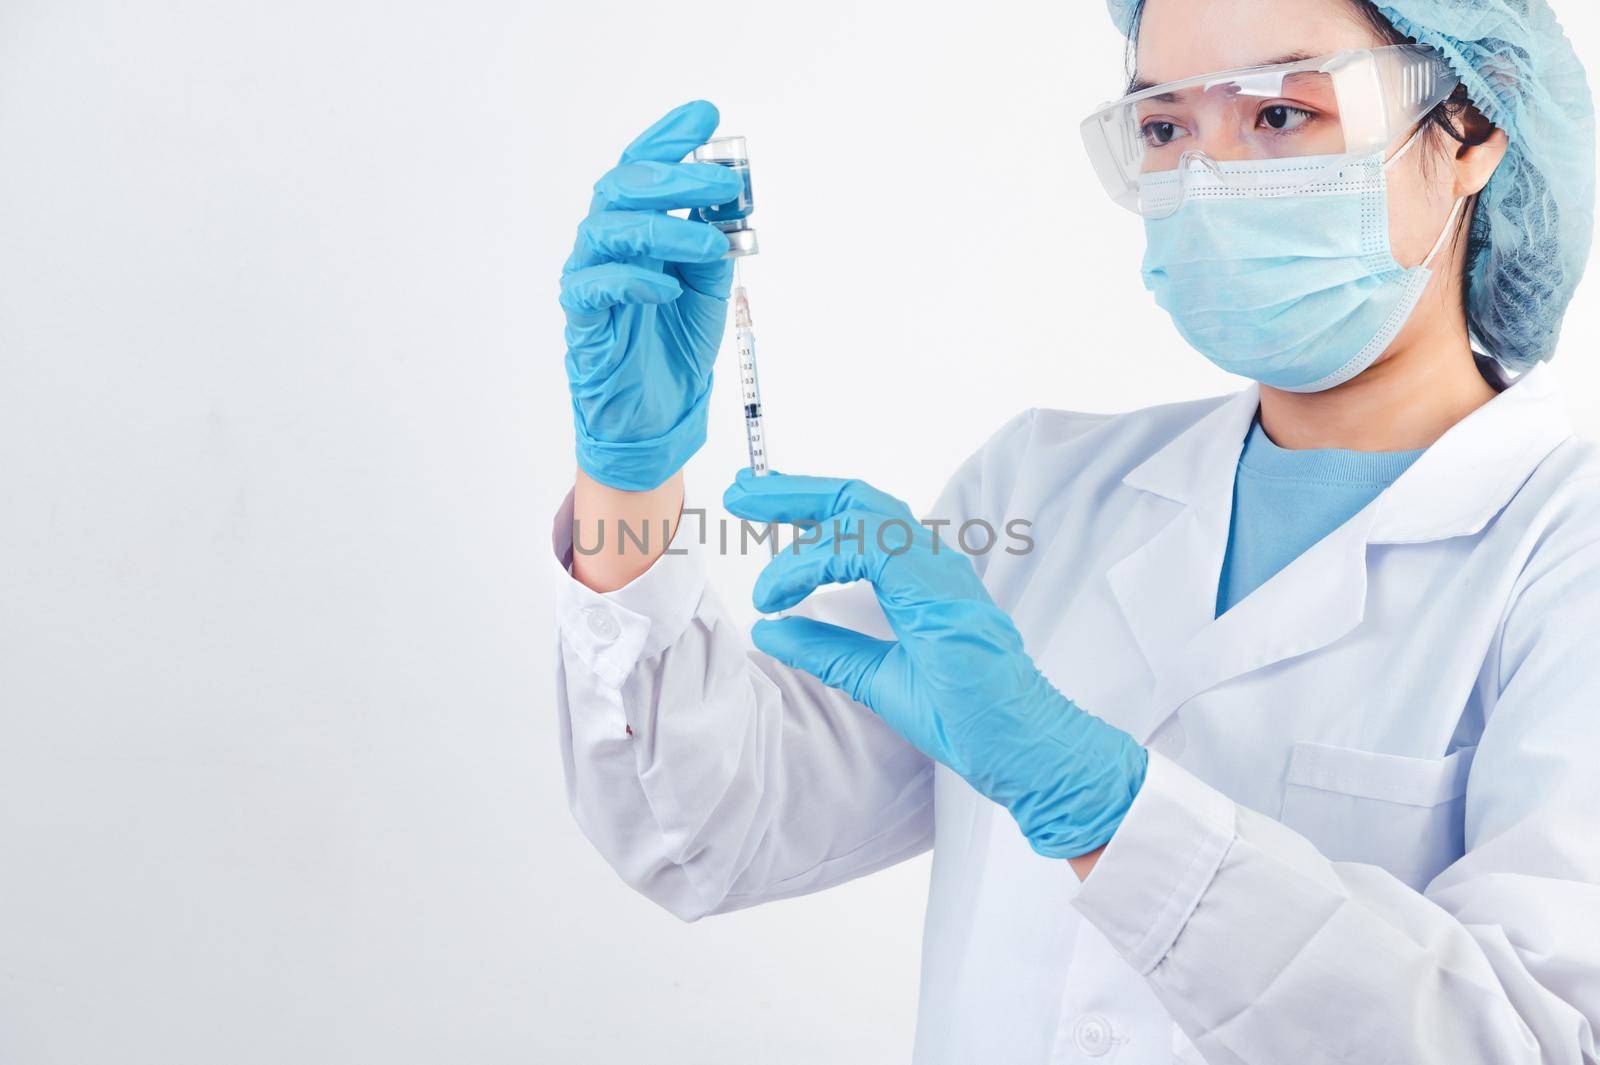 Asian doctor looking and preparing syringe vaccine and vial for injection to illness patient on white background. Medical people and illness prevention technology concept. Coronavirus epidemic theme